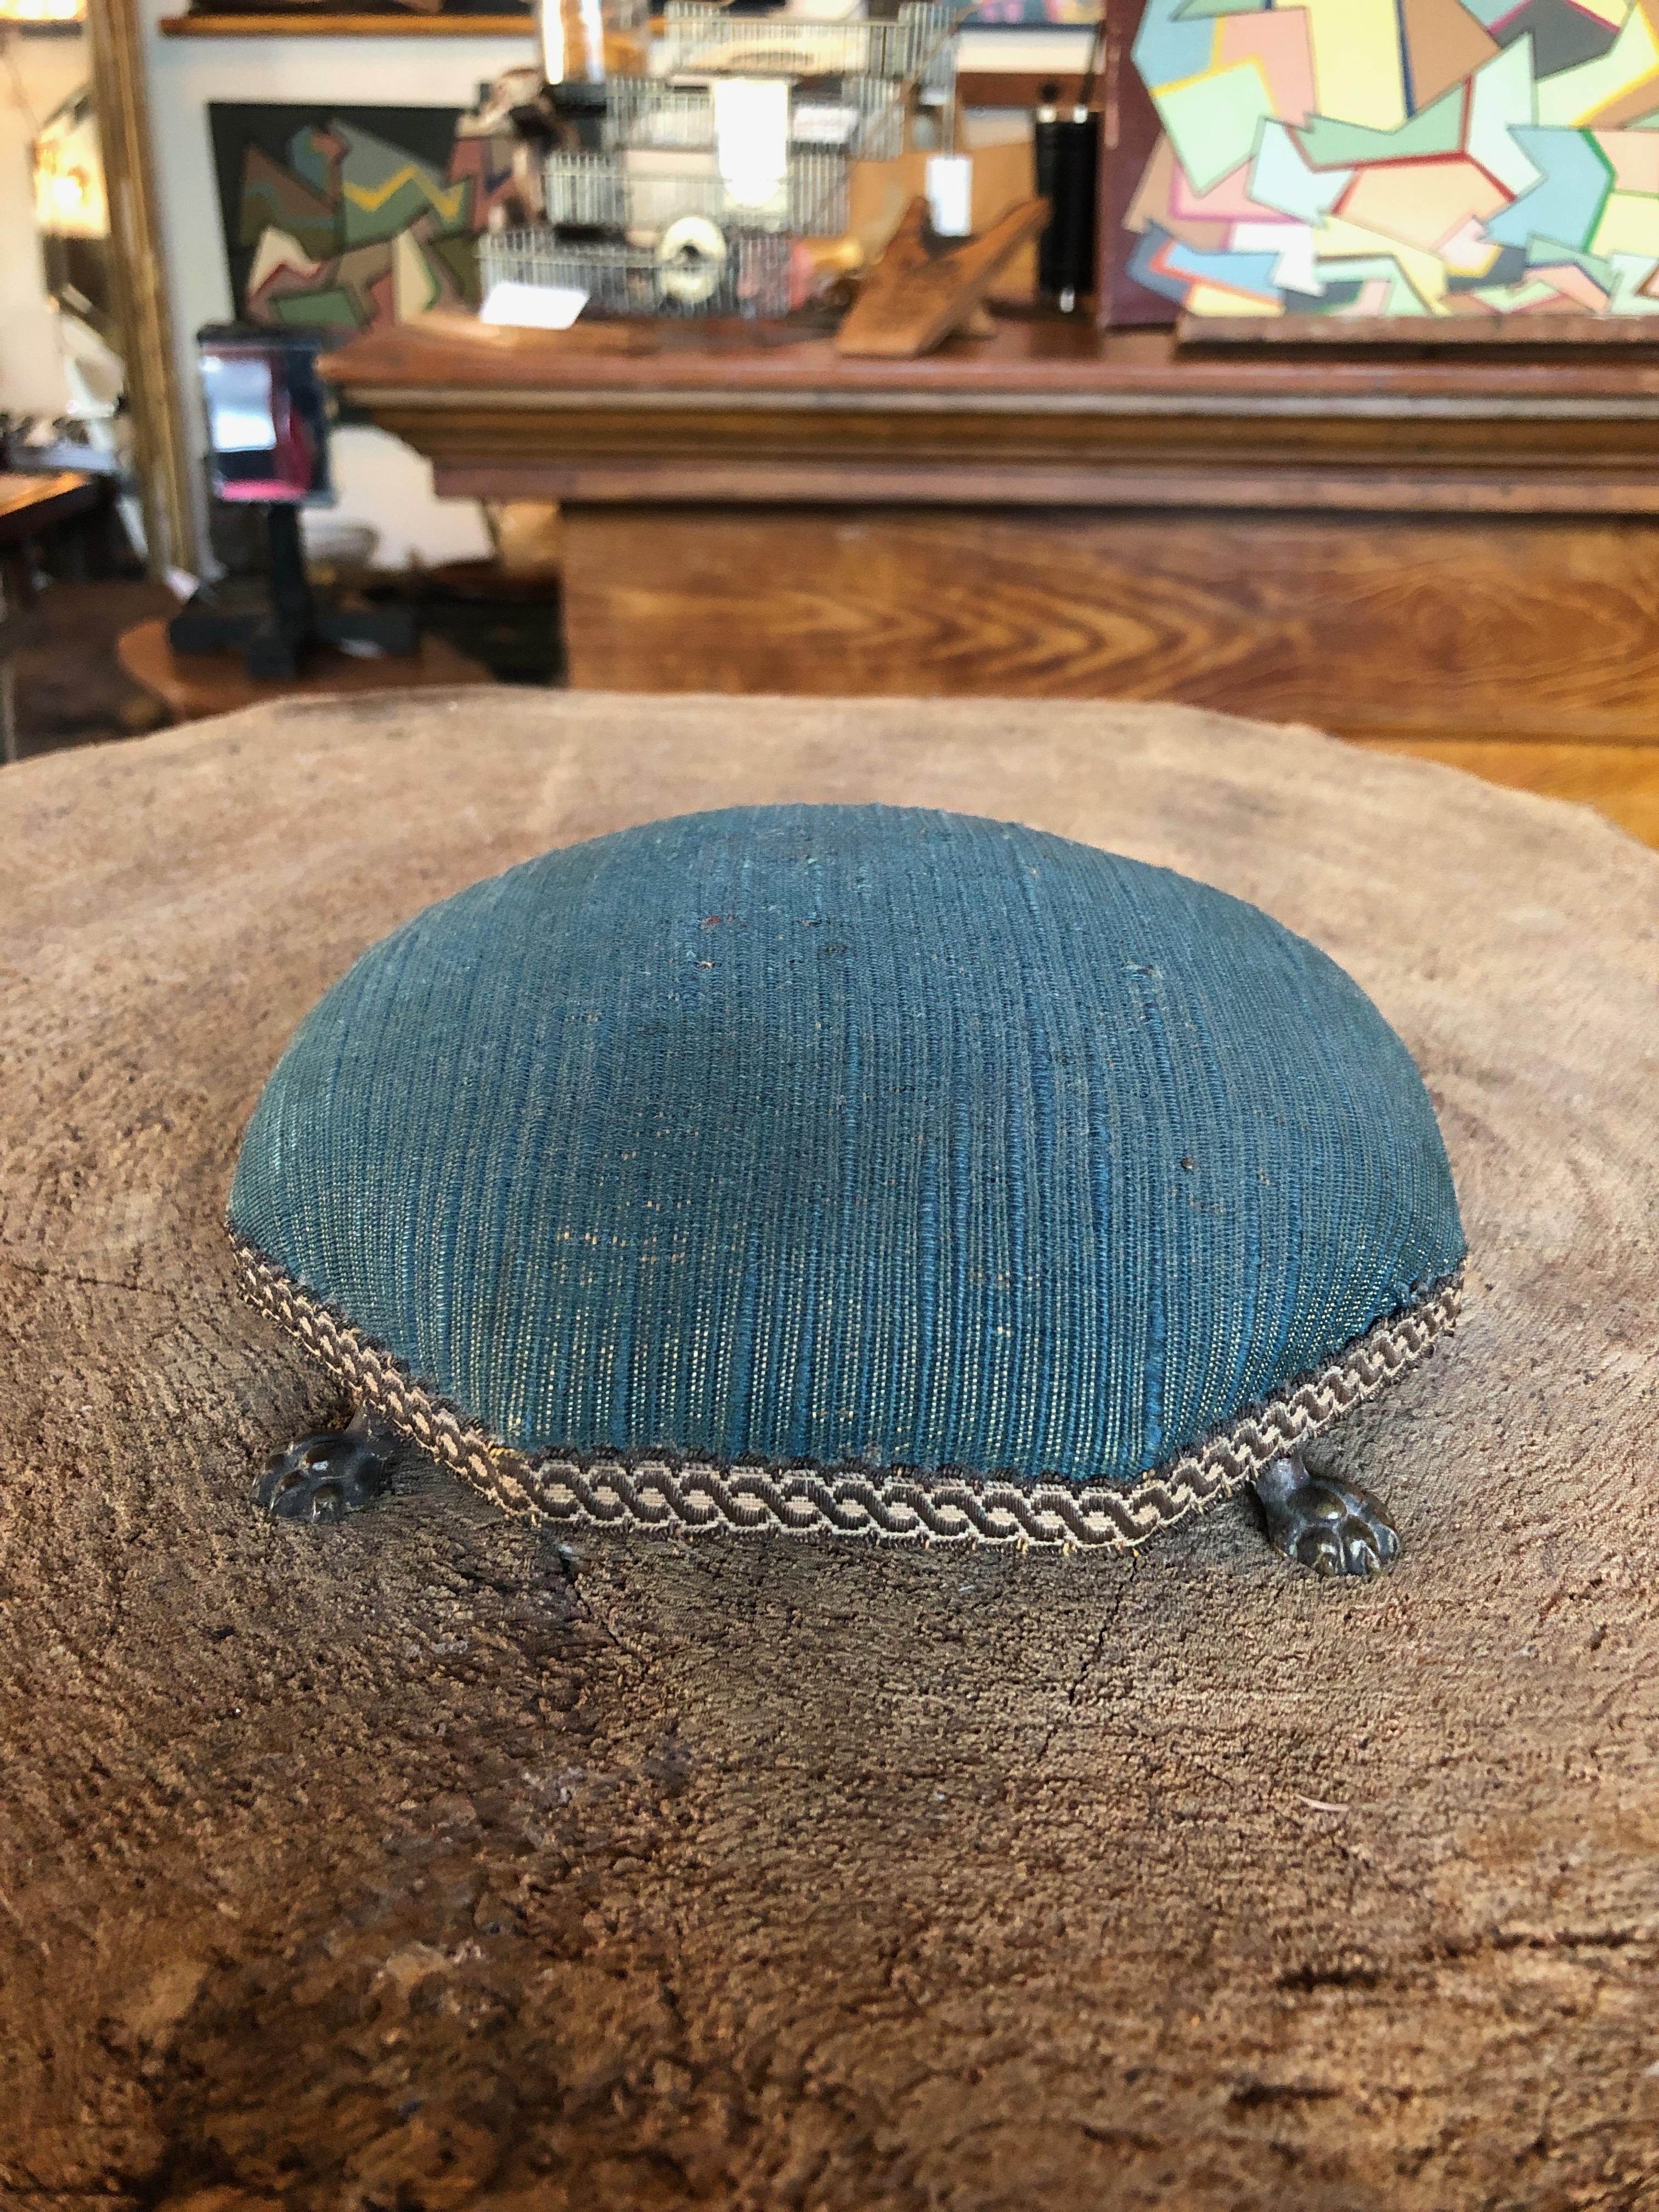 This is a fabulous early 20th century pin cushion with brass claw feet covered in original cornflower blue fabric. Great for displaying jewelry. Other pin cushions available as seen in photo.